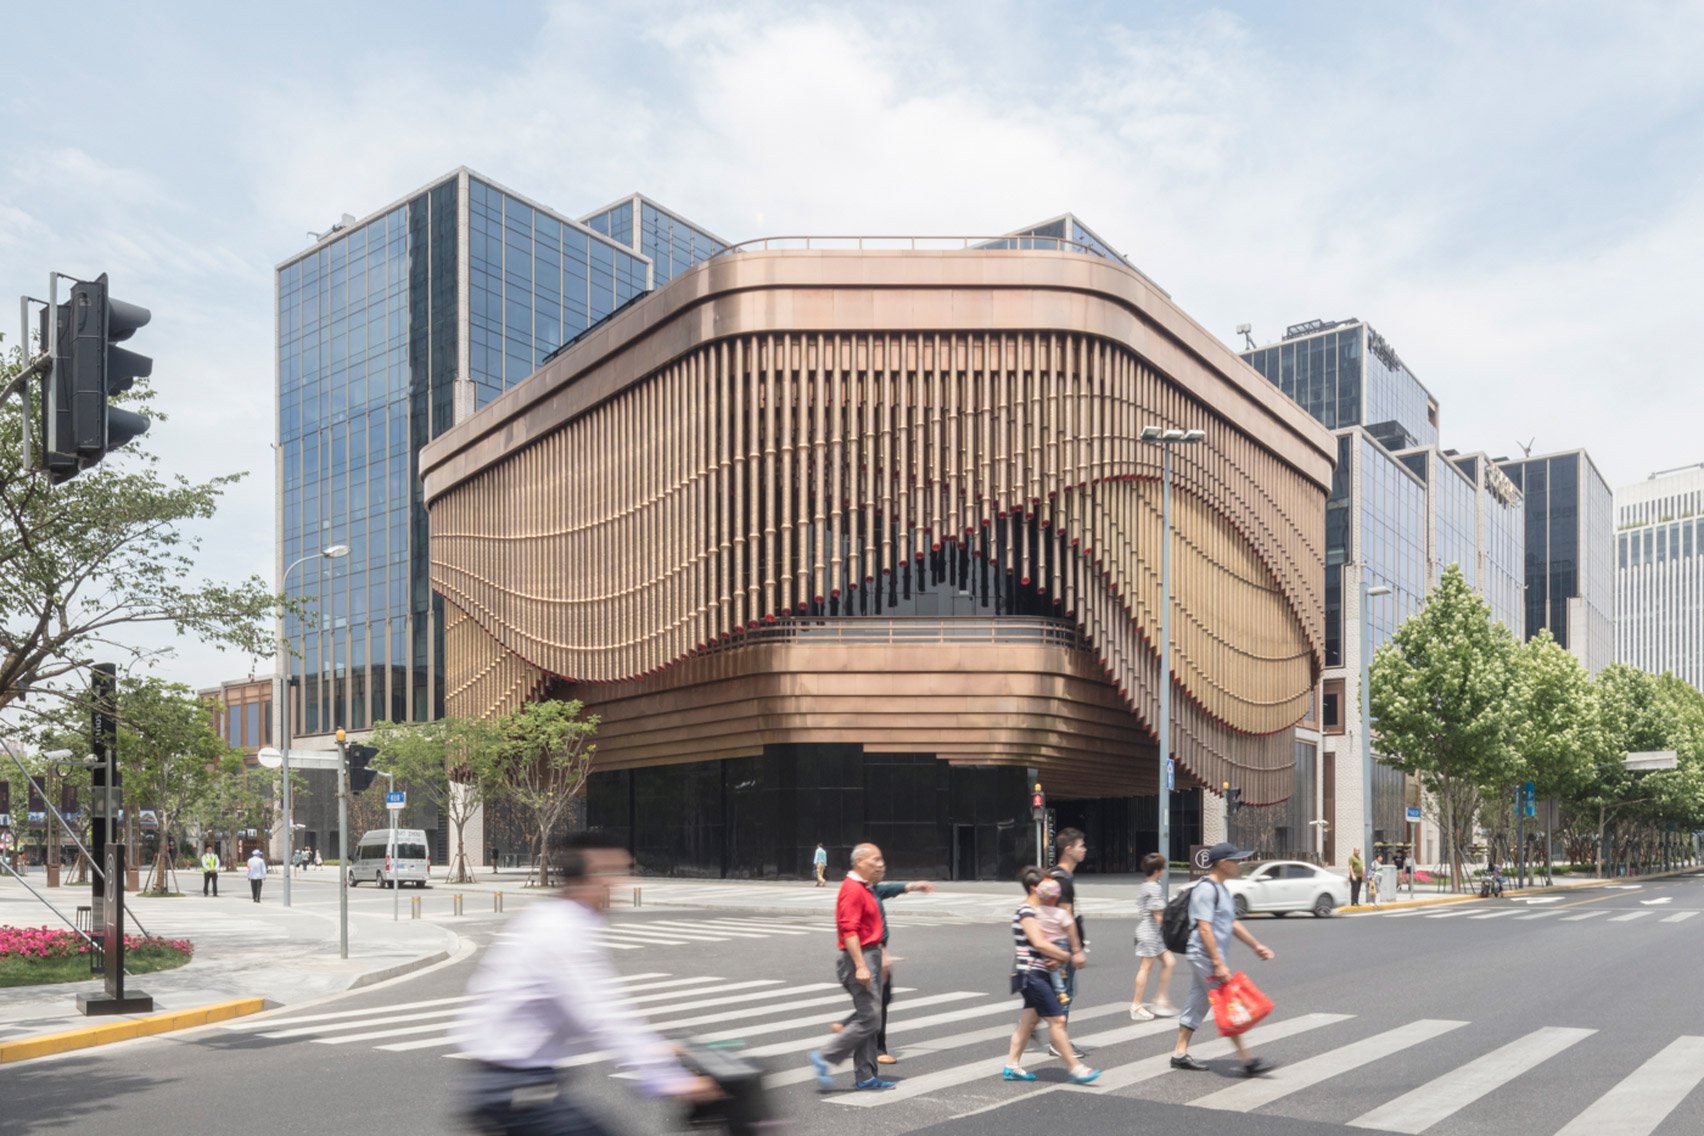 Amazing Moving Facade by Foster + Partners and Heatherwick Studios